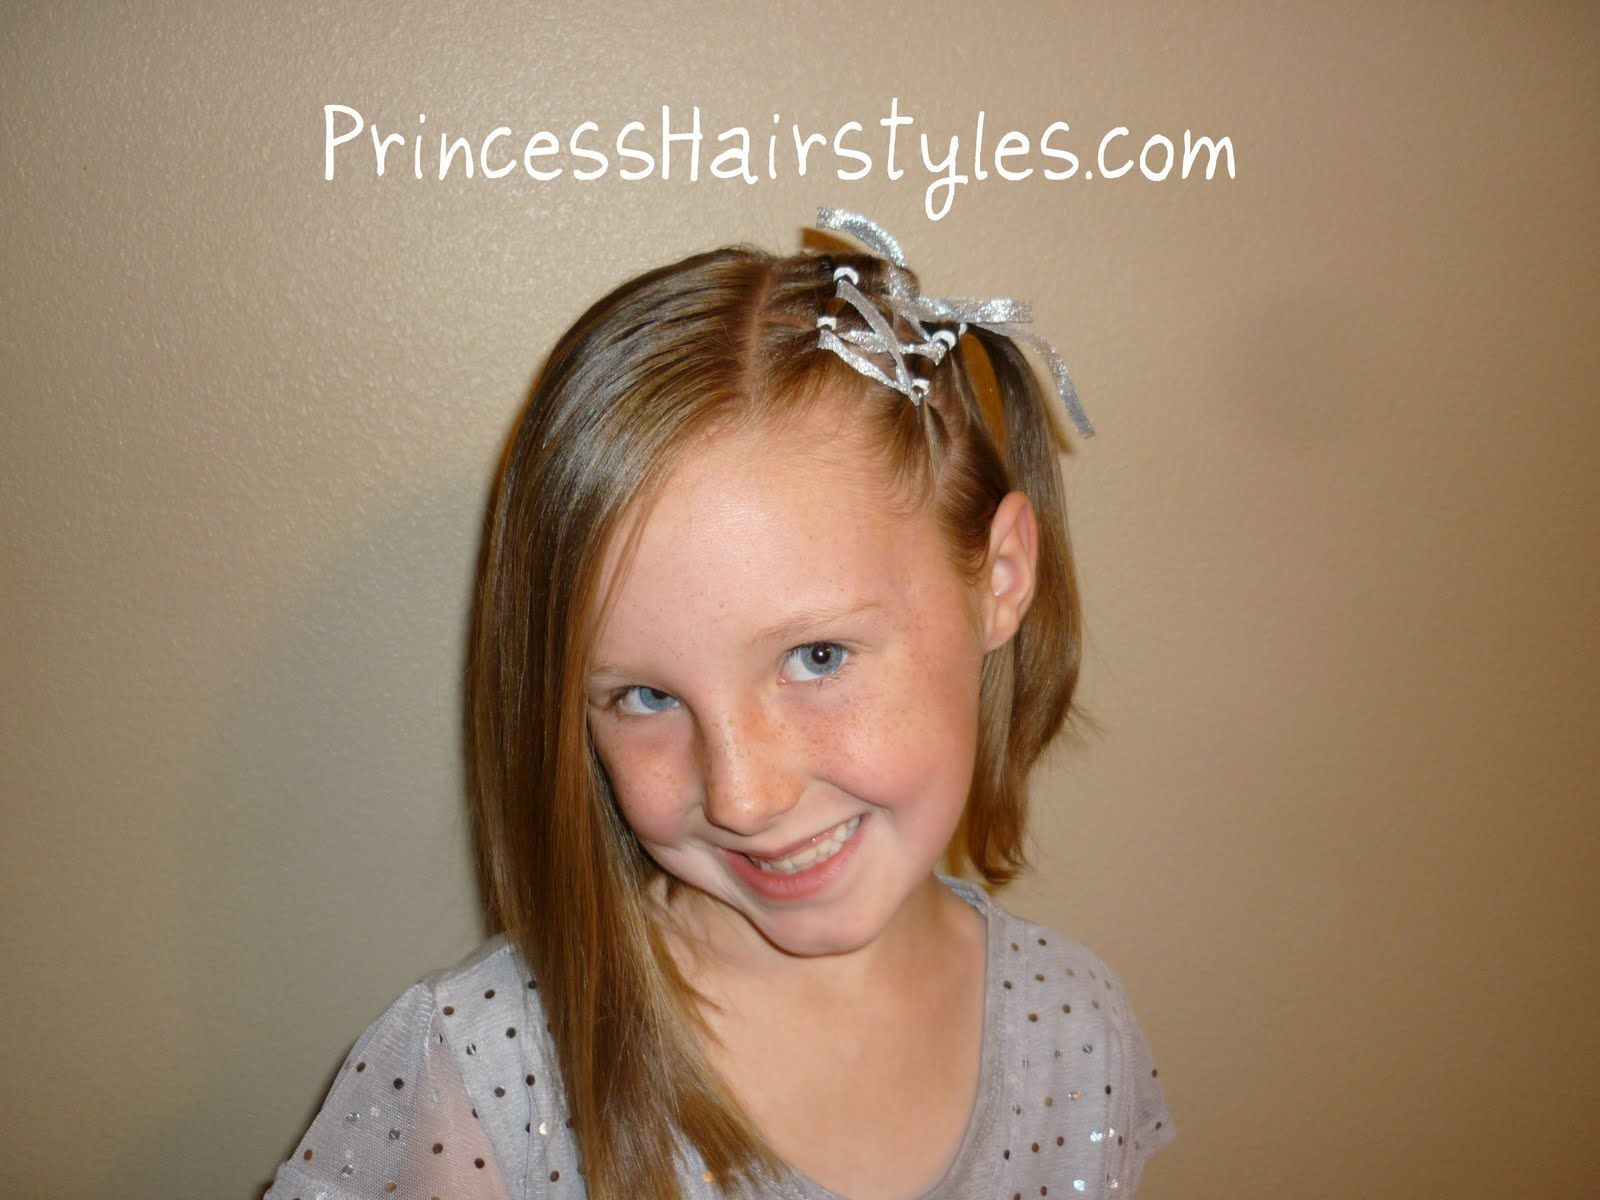 Hairstyles For 11 Year Olds With Medium Hair
 Haircuts for 11 year old girls